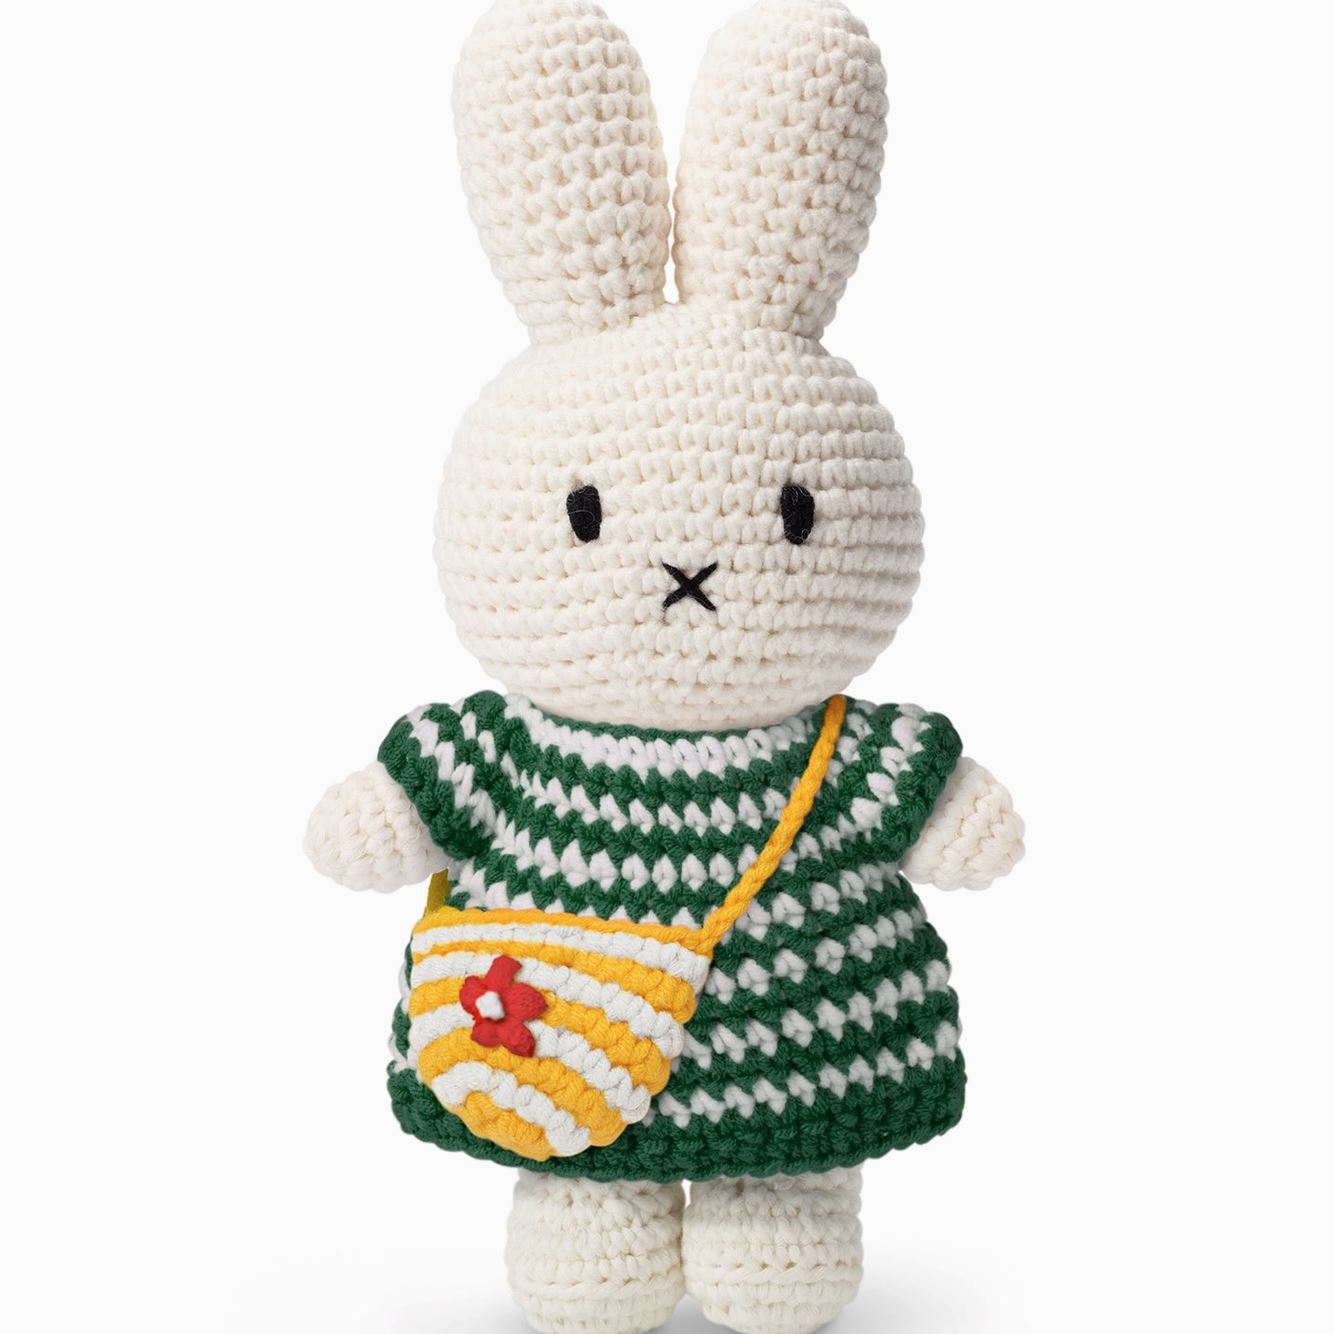 Miffy and Her Striped Bag Handmade Crocheted Soft Toy - Third Drawer Down